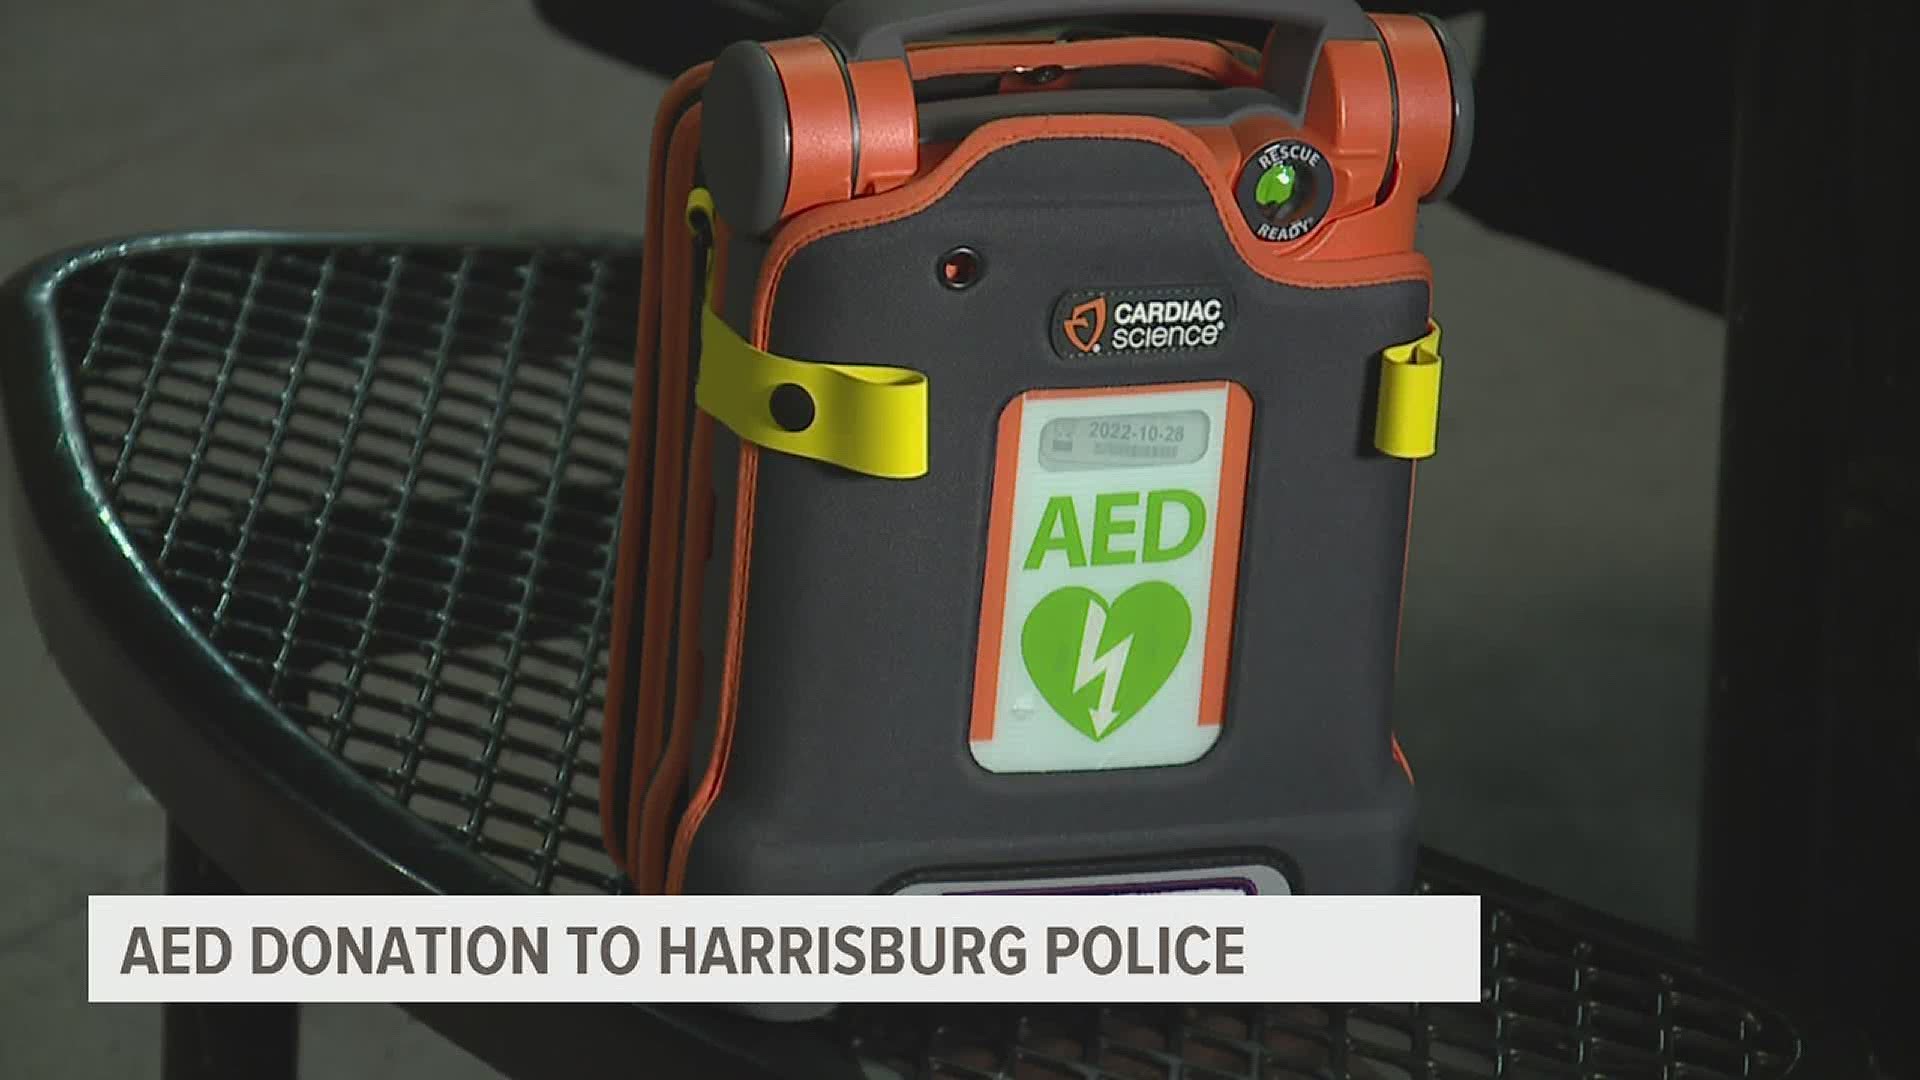 The use of an AED within two minutes of someone in sudden cardiac arrest can dramatically increases survival rates